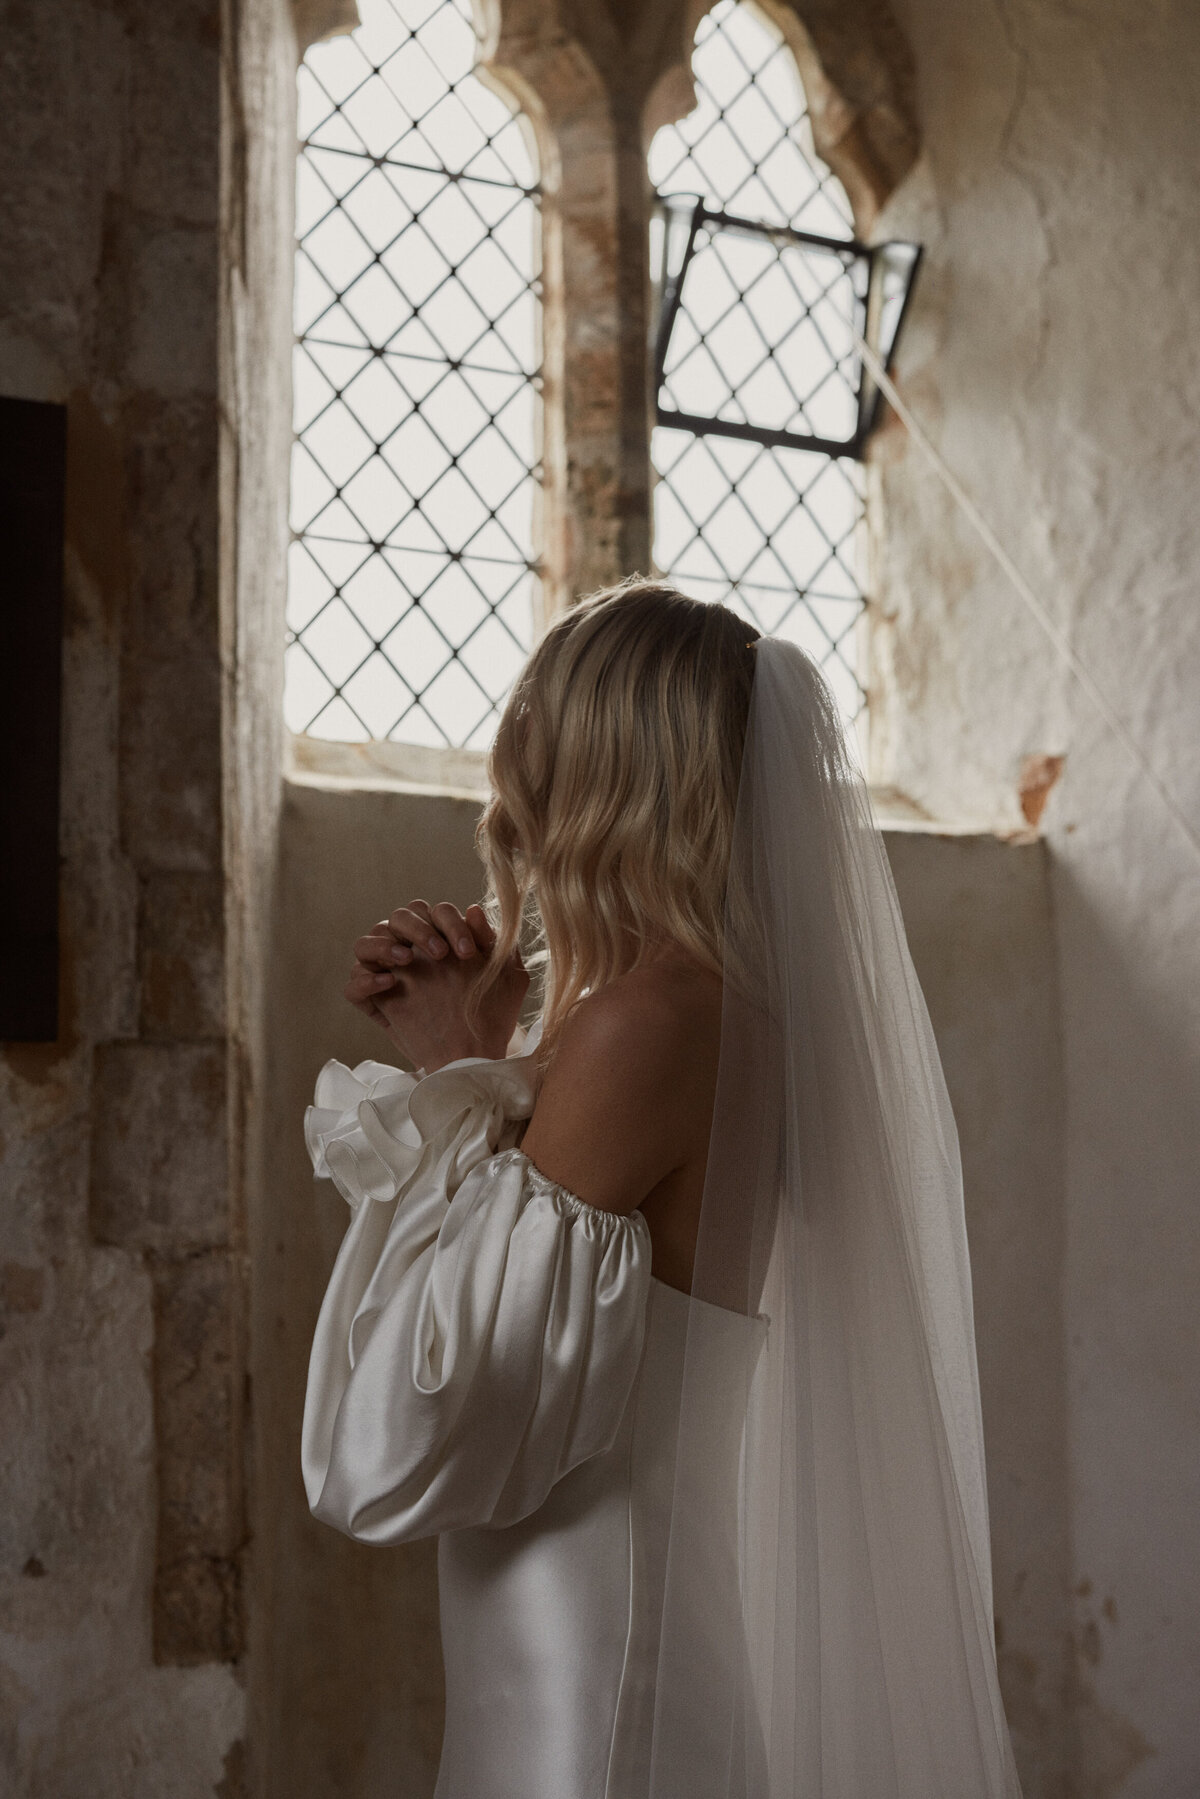 Bride looking out of window in silk wedding dress, handmade bridal gown with detachable sleeves by Luna Bea